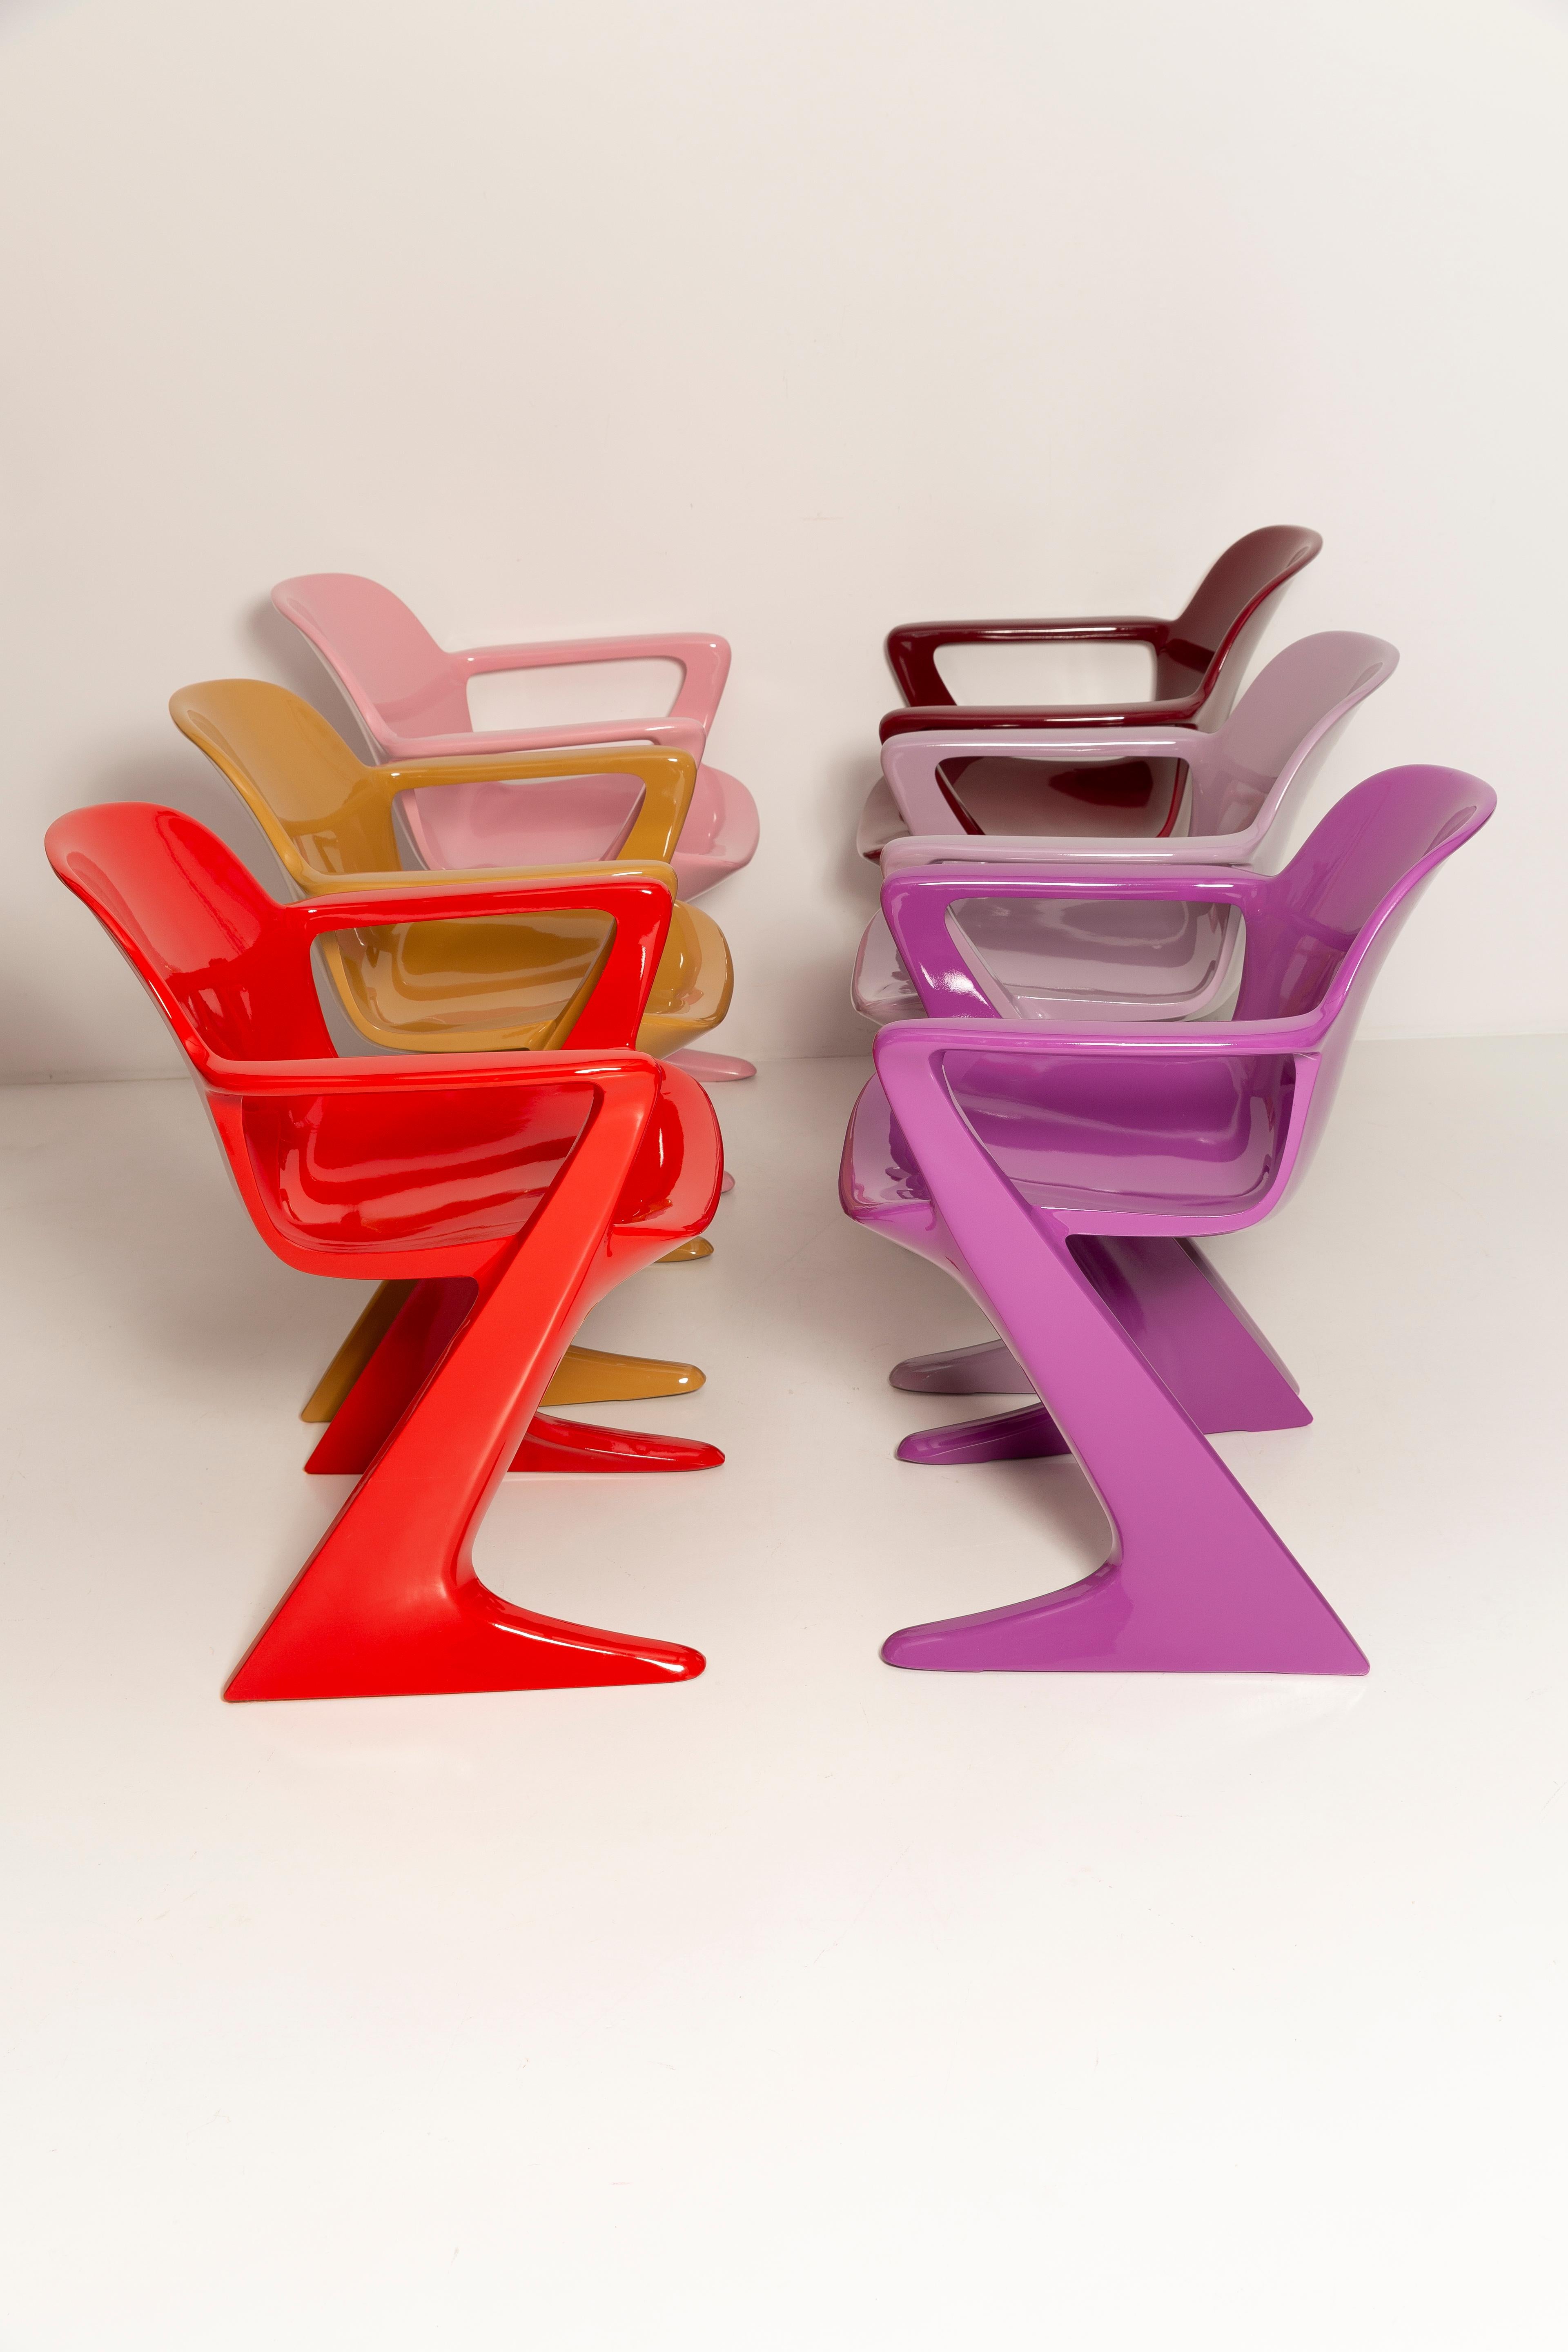 Set of Three Mid Century Kangaroo Chairs, Ernst Moeckl, Germany, 1968 For Sale 1